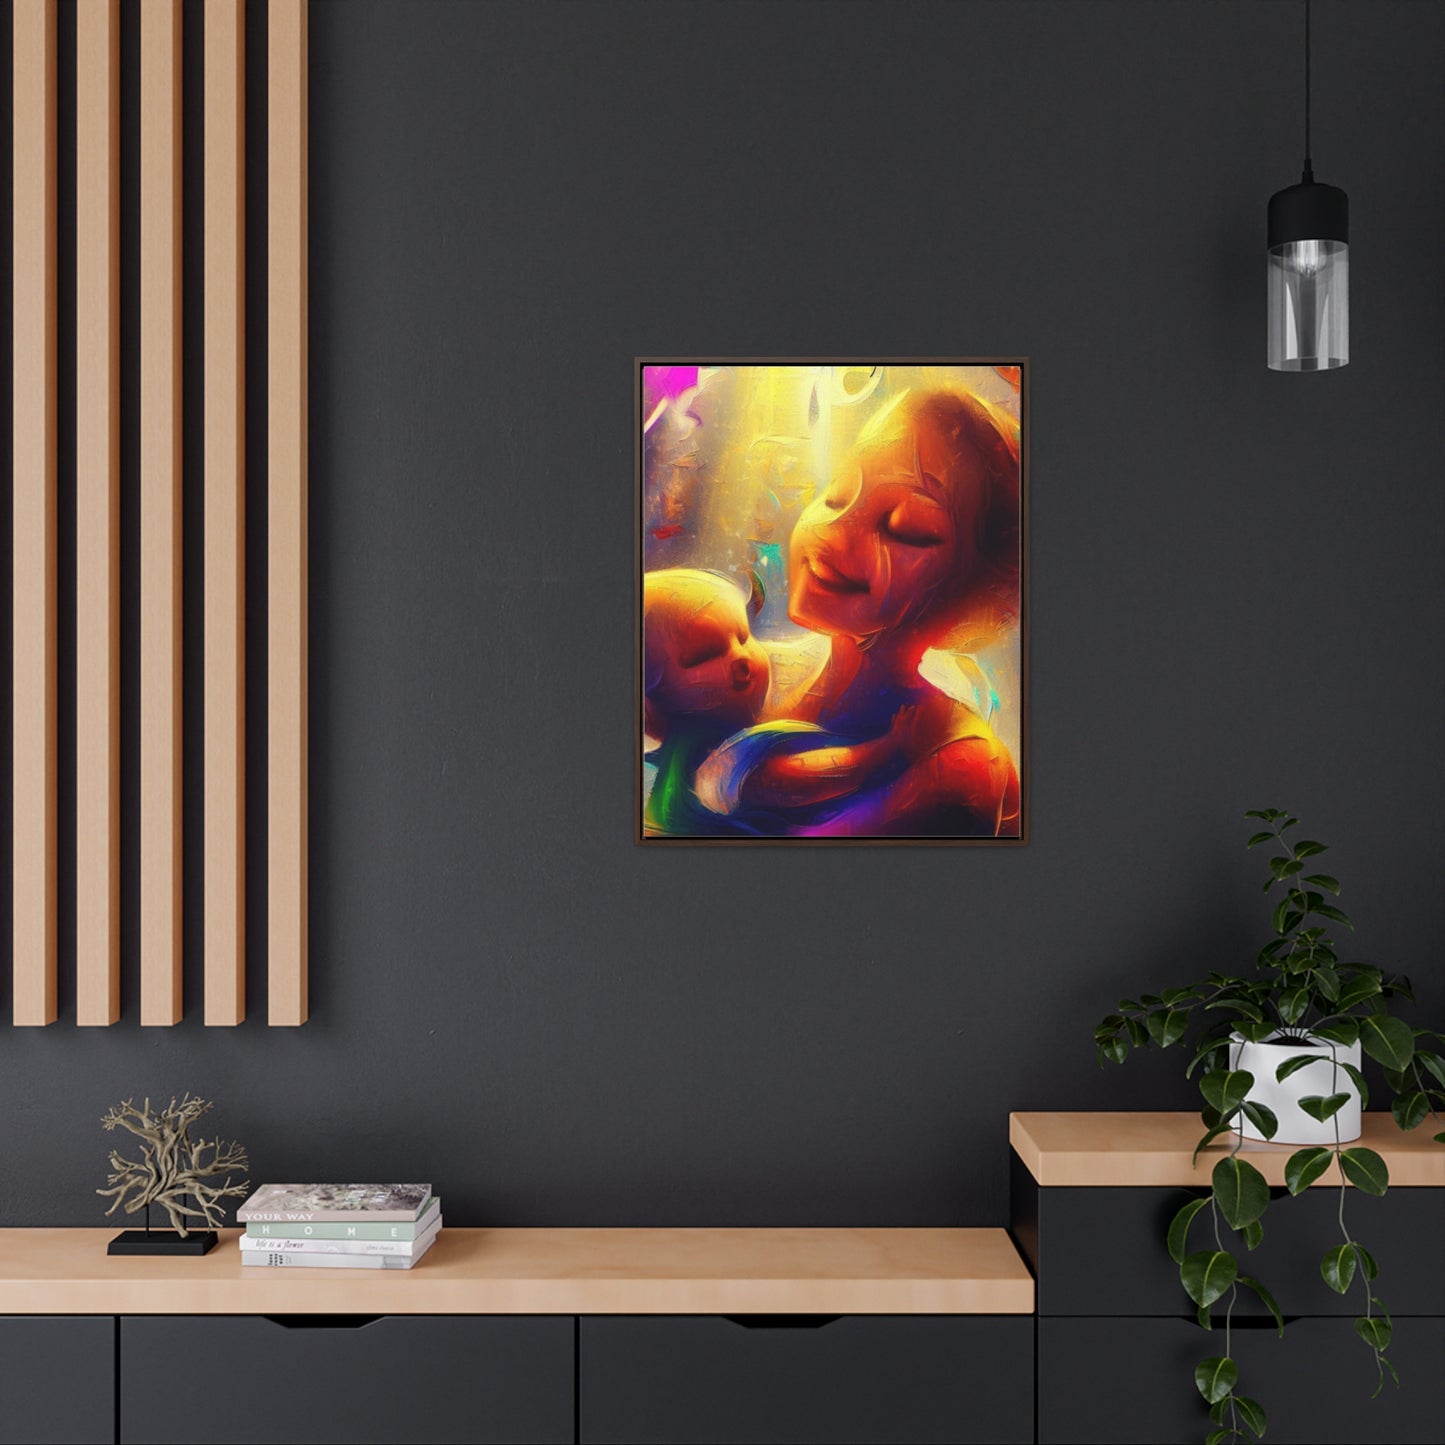 Gallery Canvas Wraps -  Vertical Frame Modern Wall Art - Mothers Day Gift Item